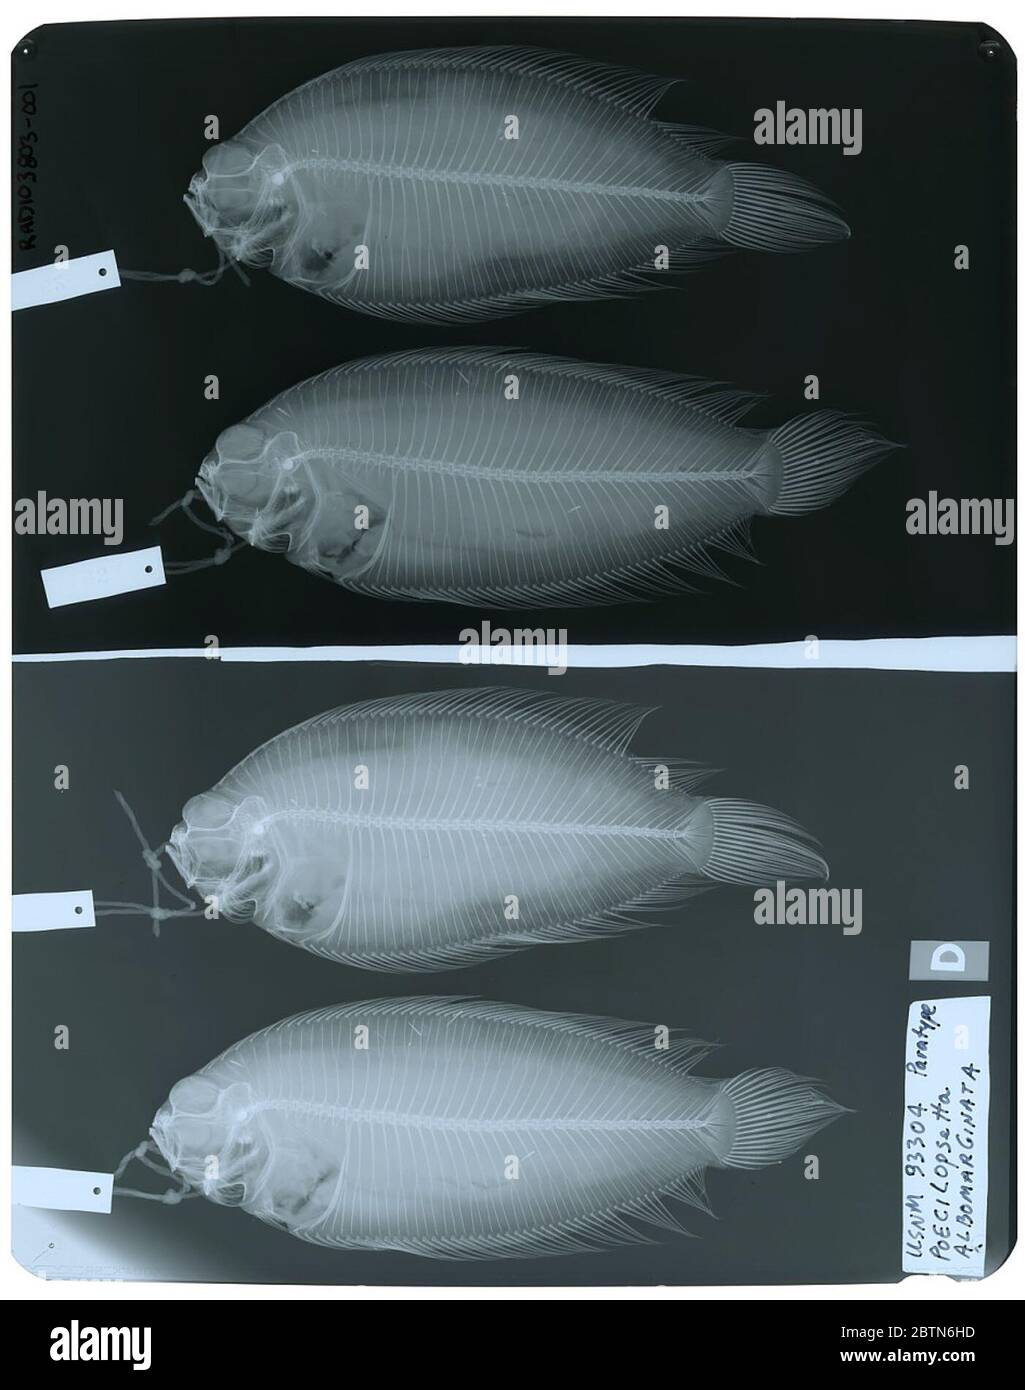 Poecilopsetta albomarginata Reid. Radiograph is of a paratype; The Smithsonian NMNH Division of Fishes uses the convention of maintaining the original species name for type specimens designated at the time of description. The currently accepted name for this species is Poecilopsetta inermis.25 Oct 20181003 Stock Photo